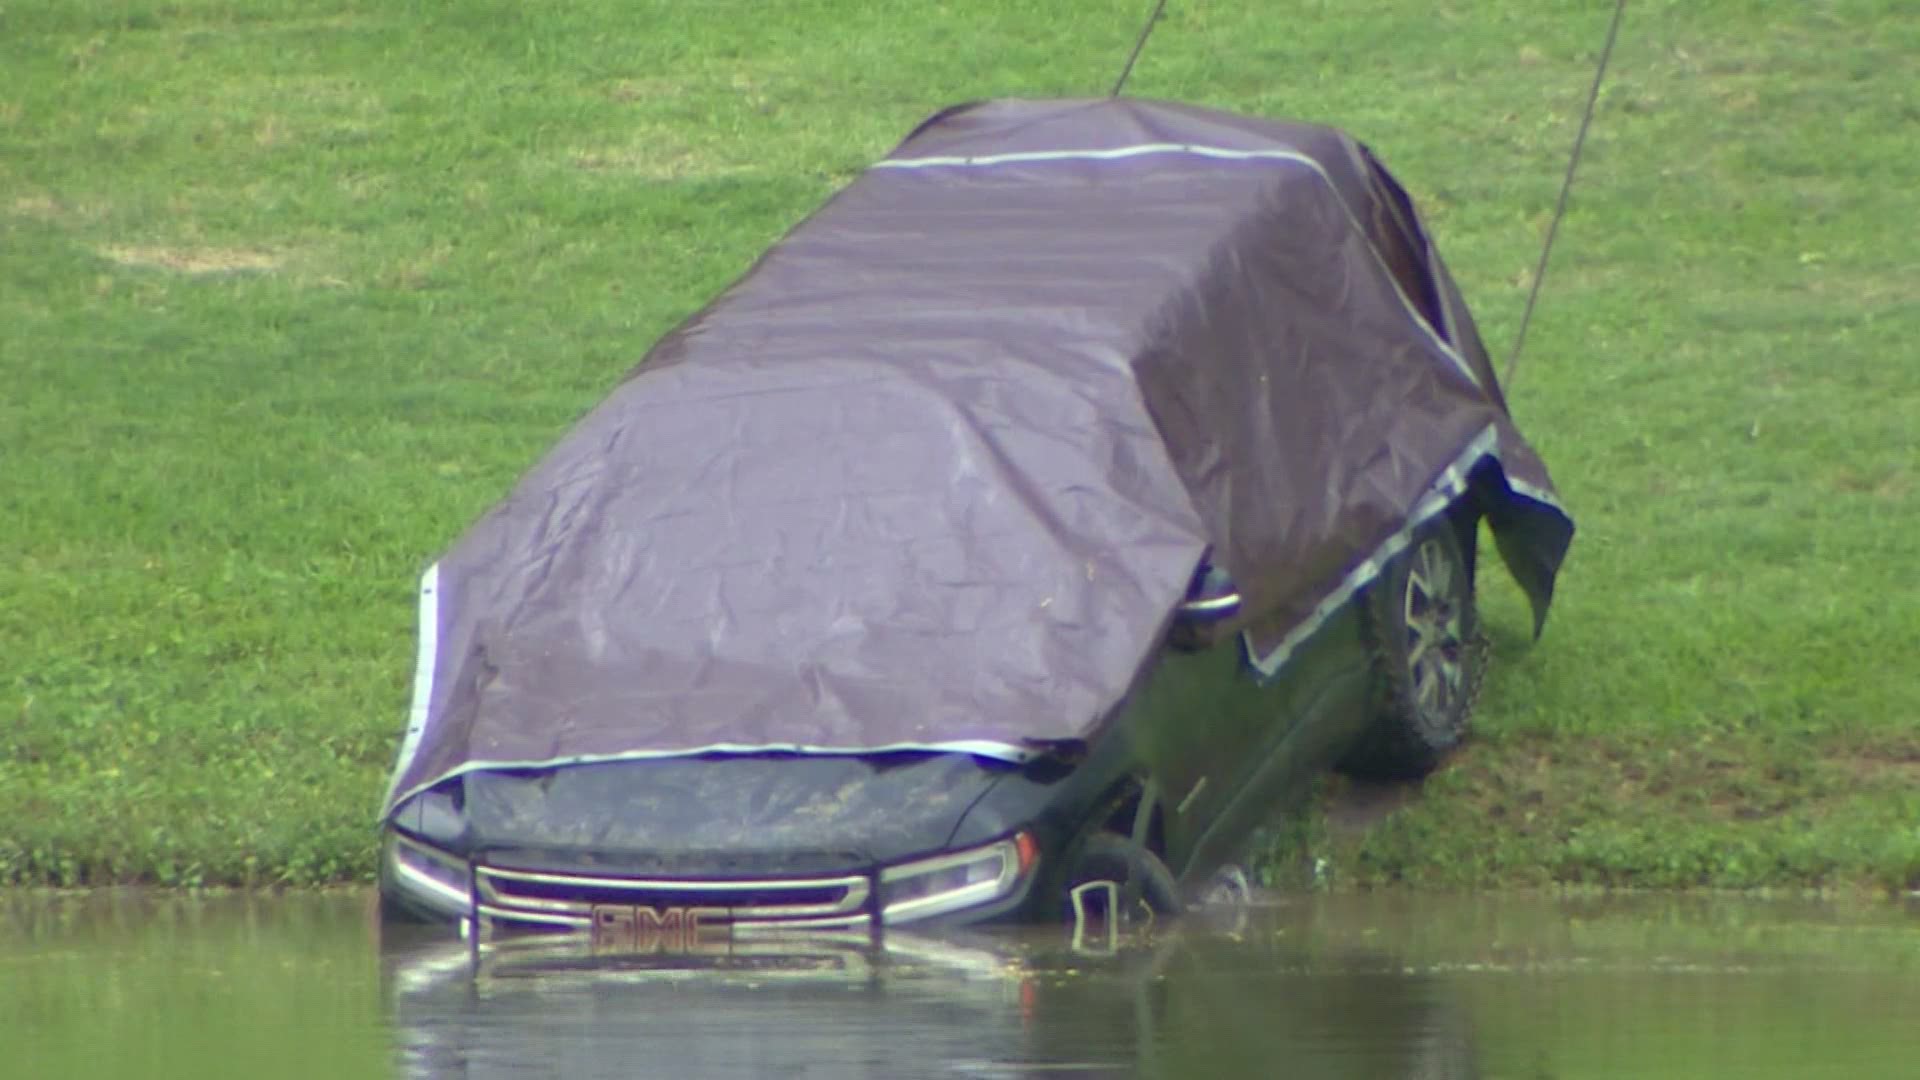 A vehicle belonging to missing woman Erica Hernandez was pulled Tuesday from a Pearland pond with a body inside.